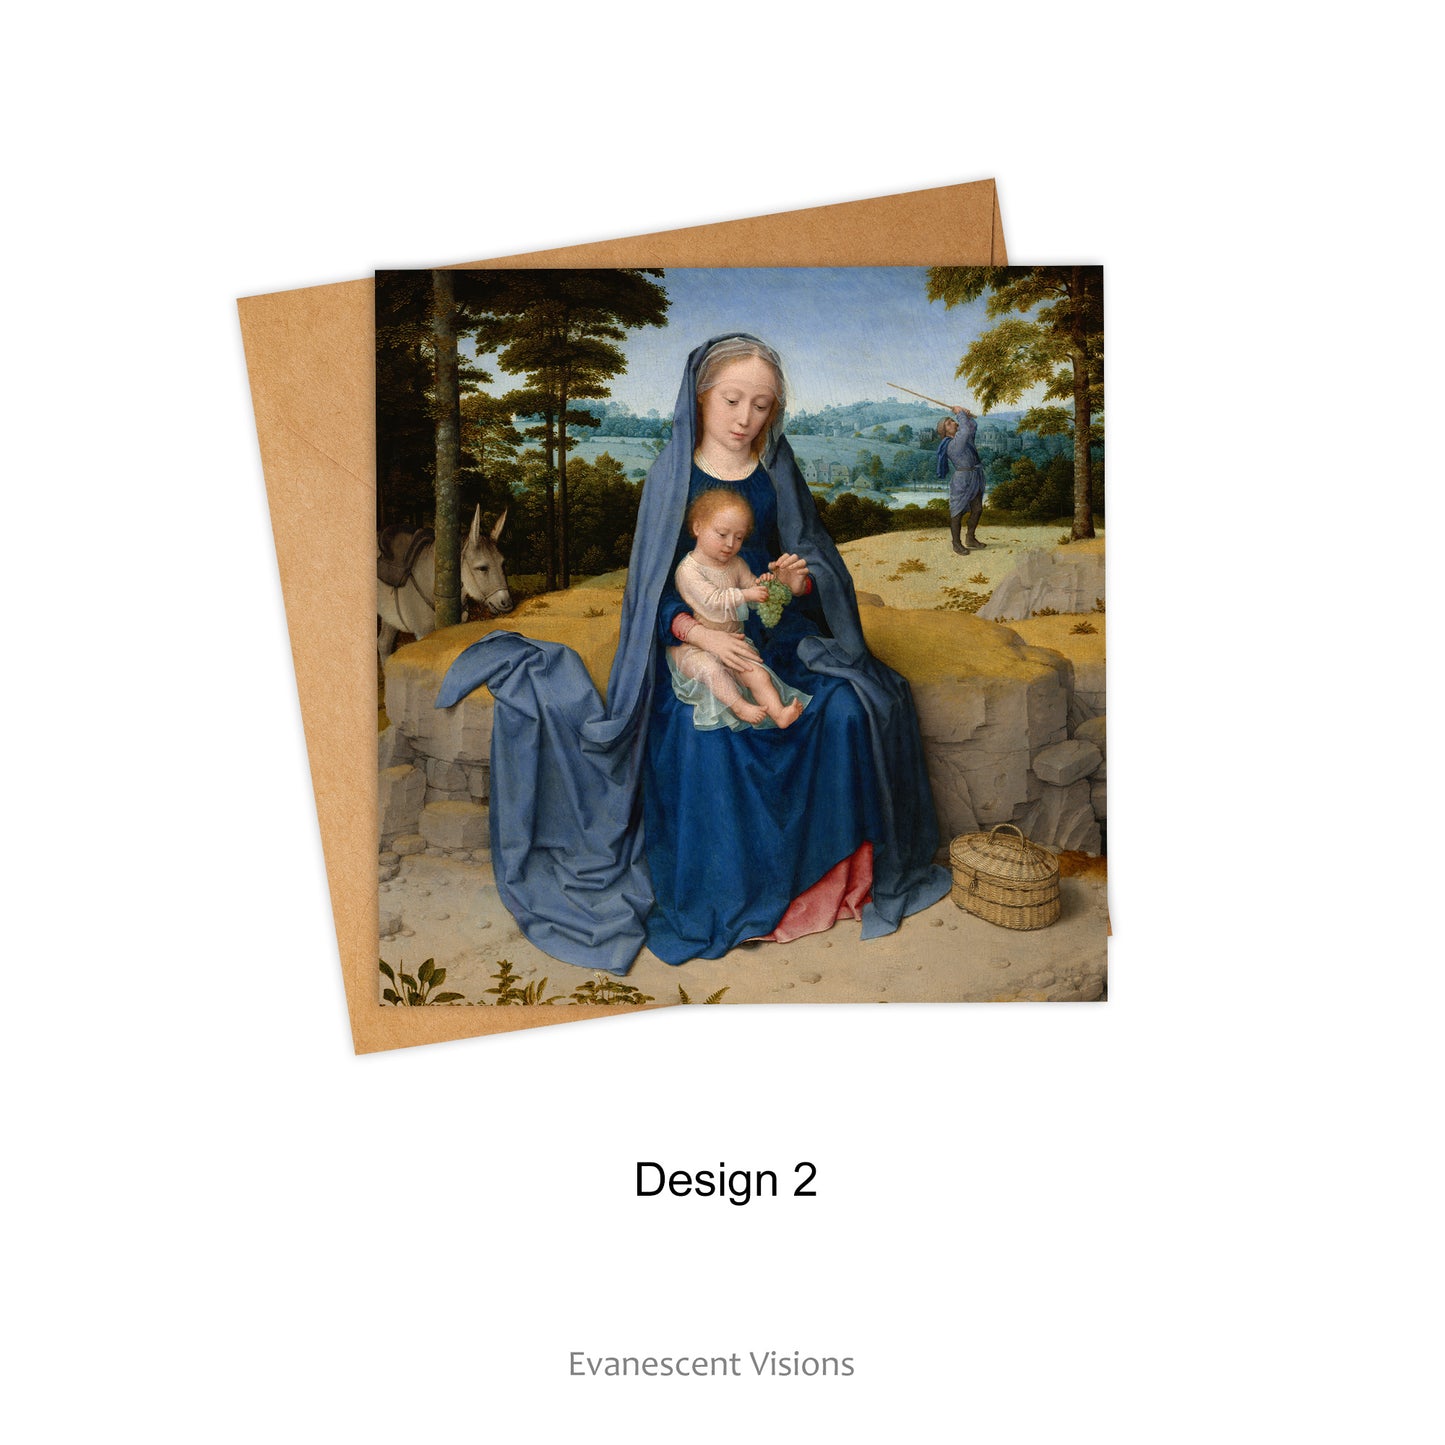 Card and envelope with Design 2, 'The Rest on the Flight into Egypt' by Gerard David (c.1460-1523).